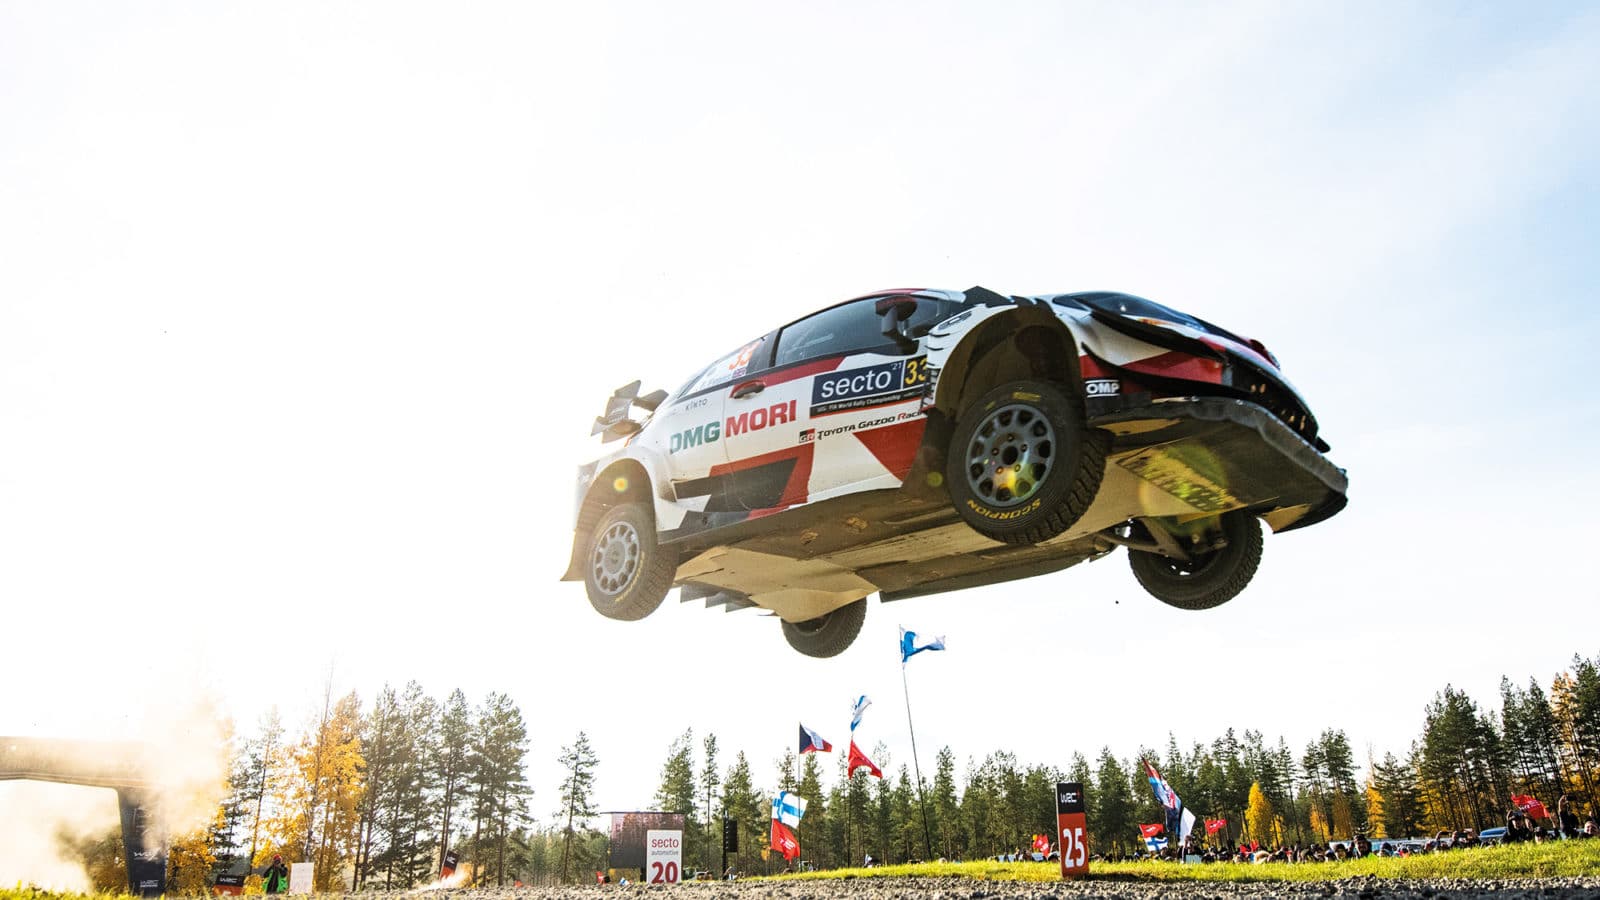 Toyota of Elfyn Evans in mid air at Rally Finland jump